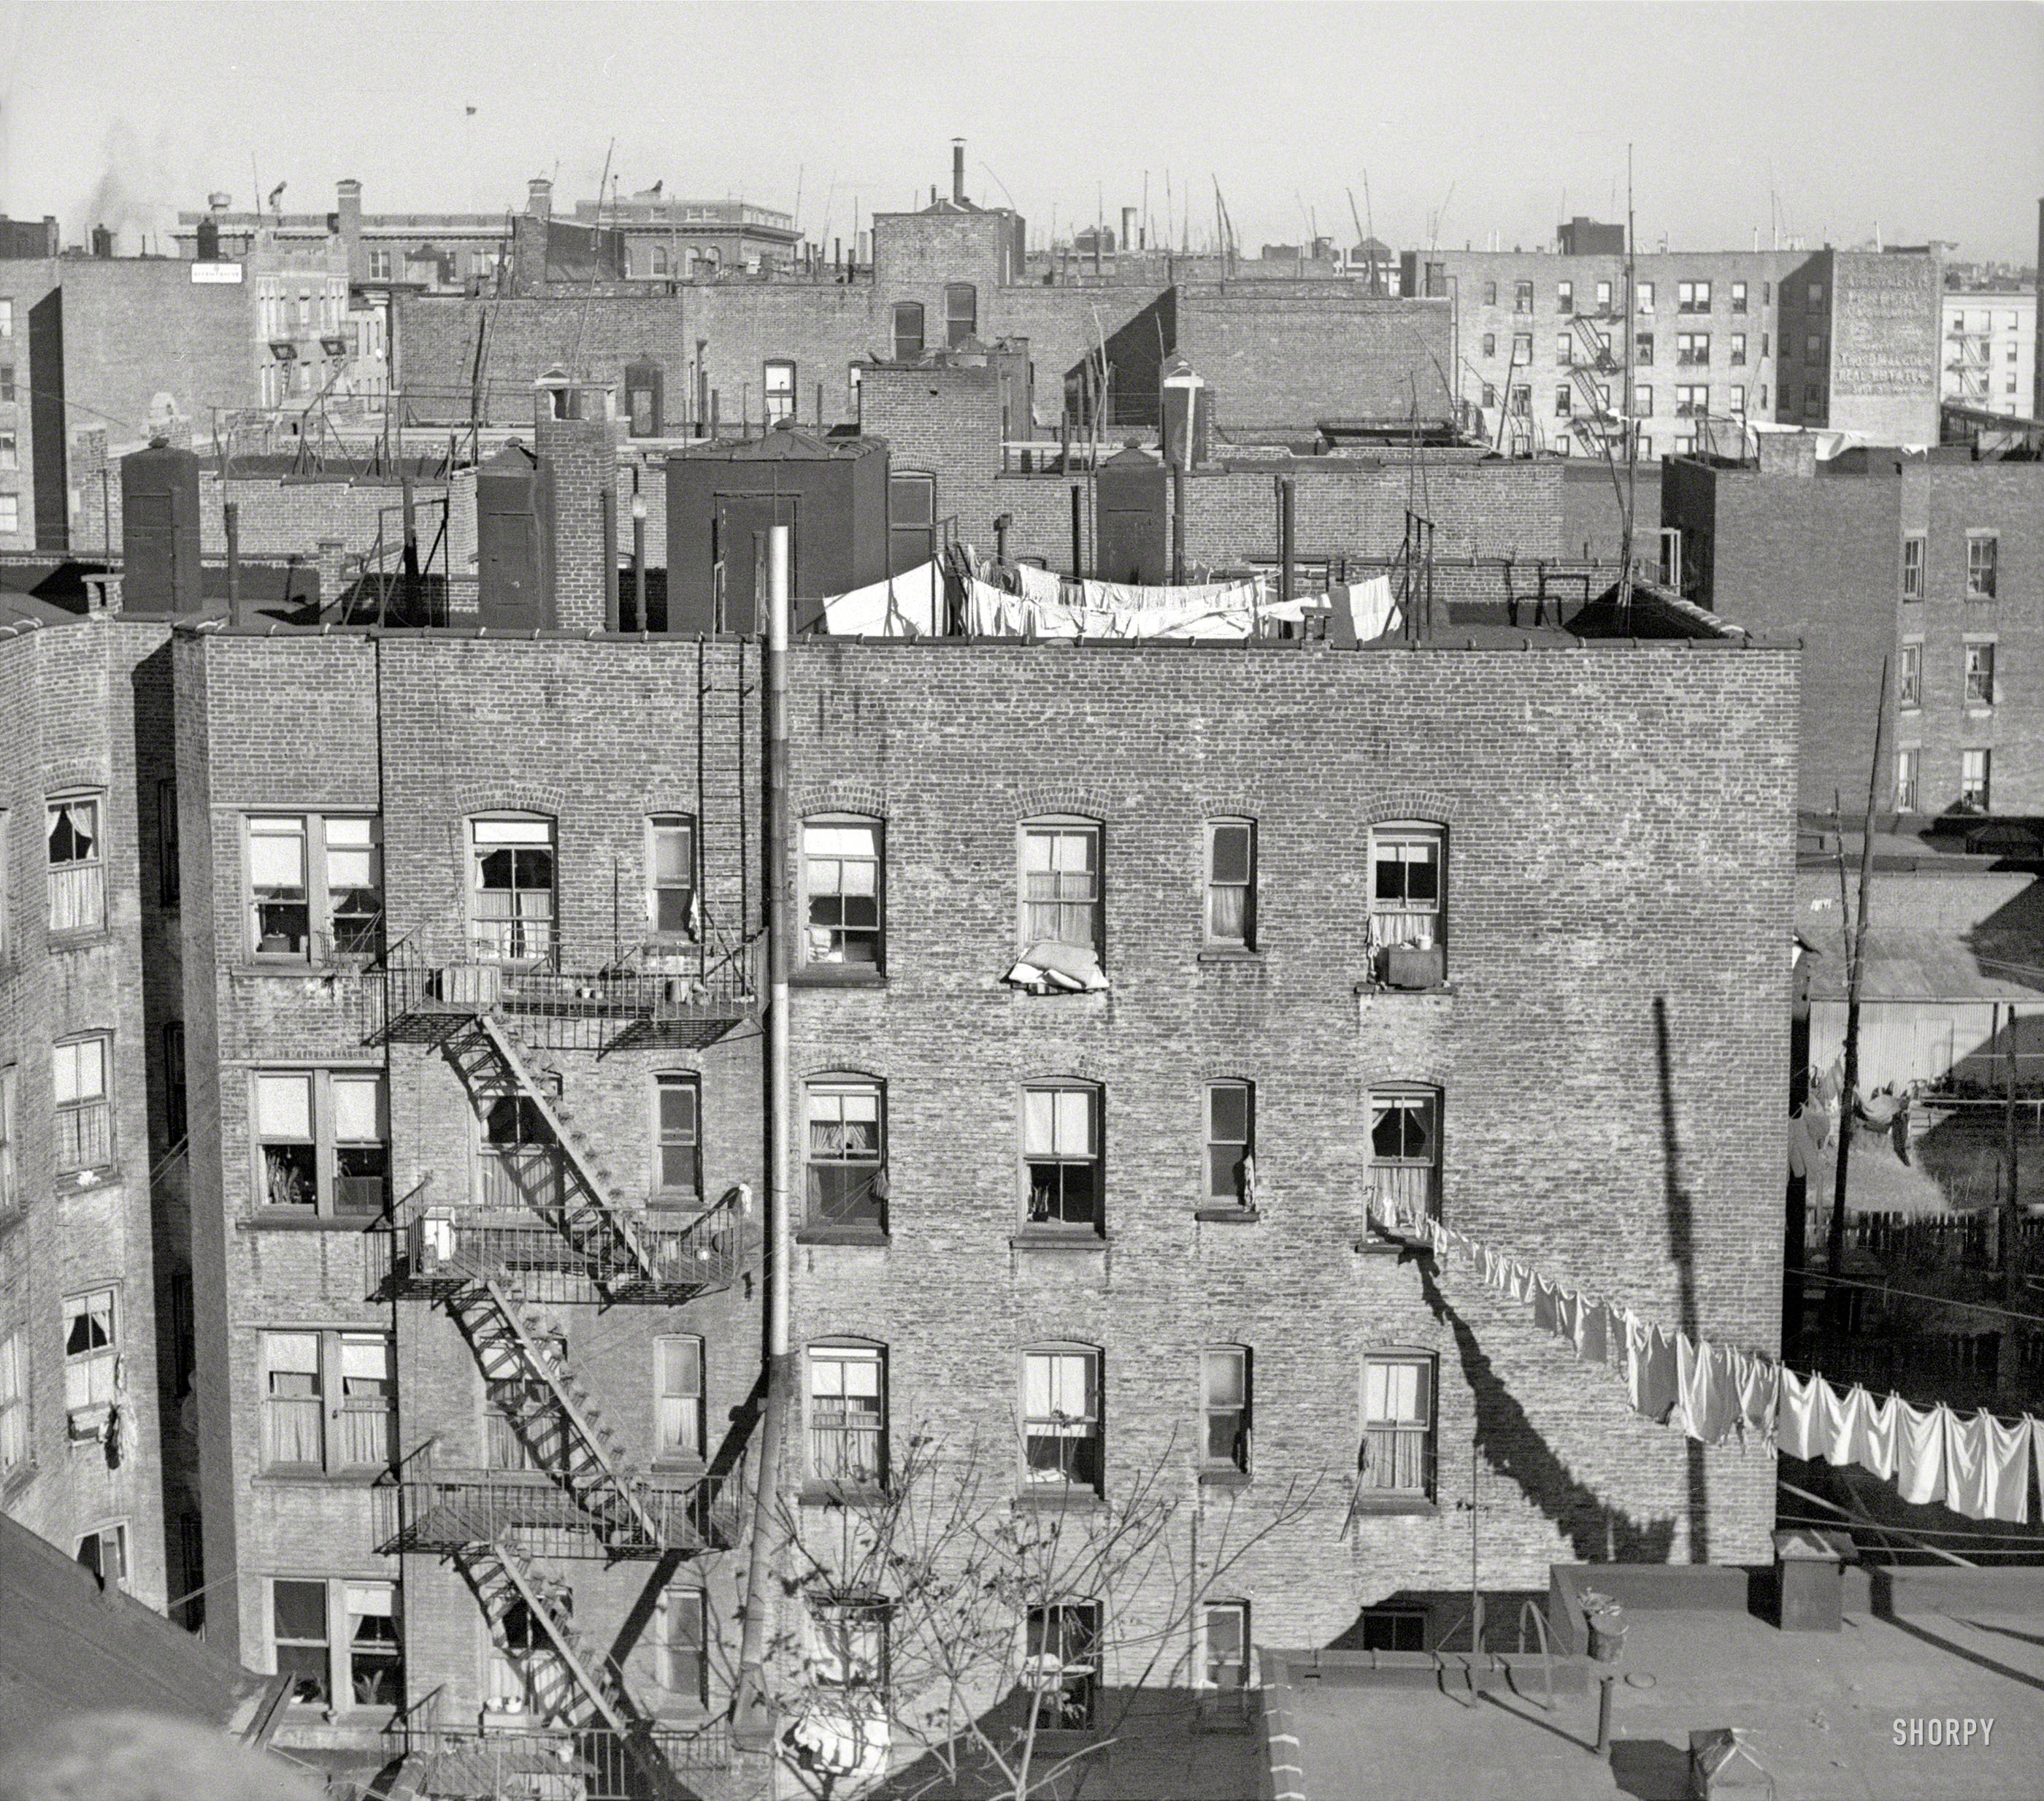 December 1936. "New York. Scene from the Bronx tenement district from which many of the New Jersey homesteaders have come." There are a million stories in the Naked City, and a lot of them seem to involve laundry. Photo by Arthur Rothstein for the Resettlement Administration. View full size.